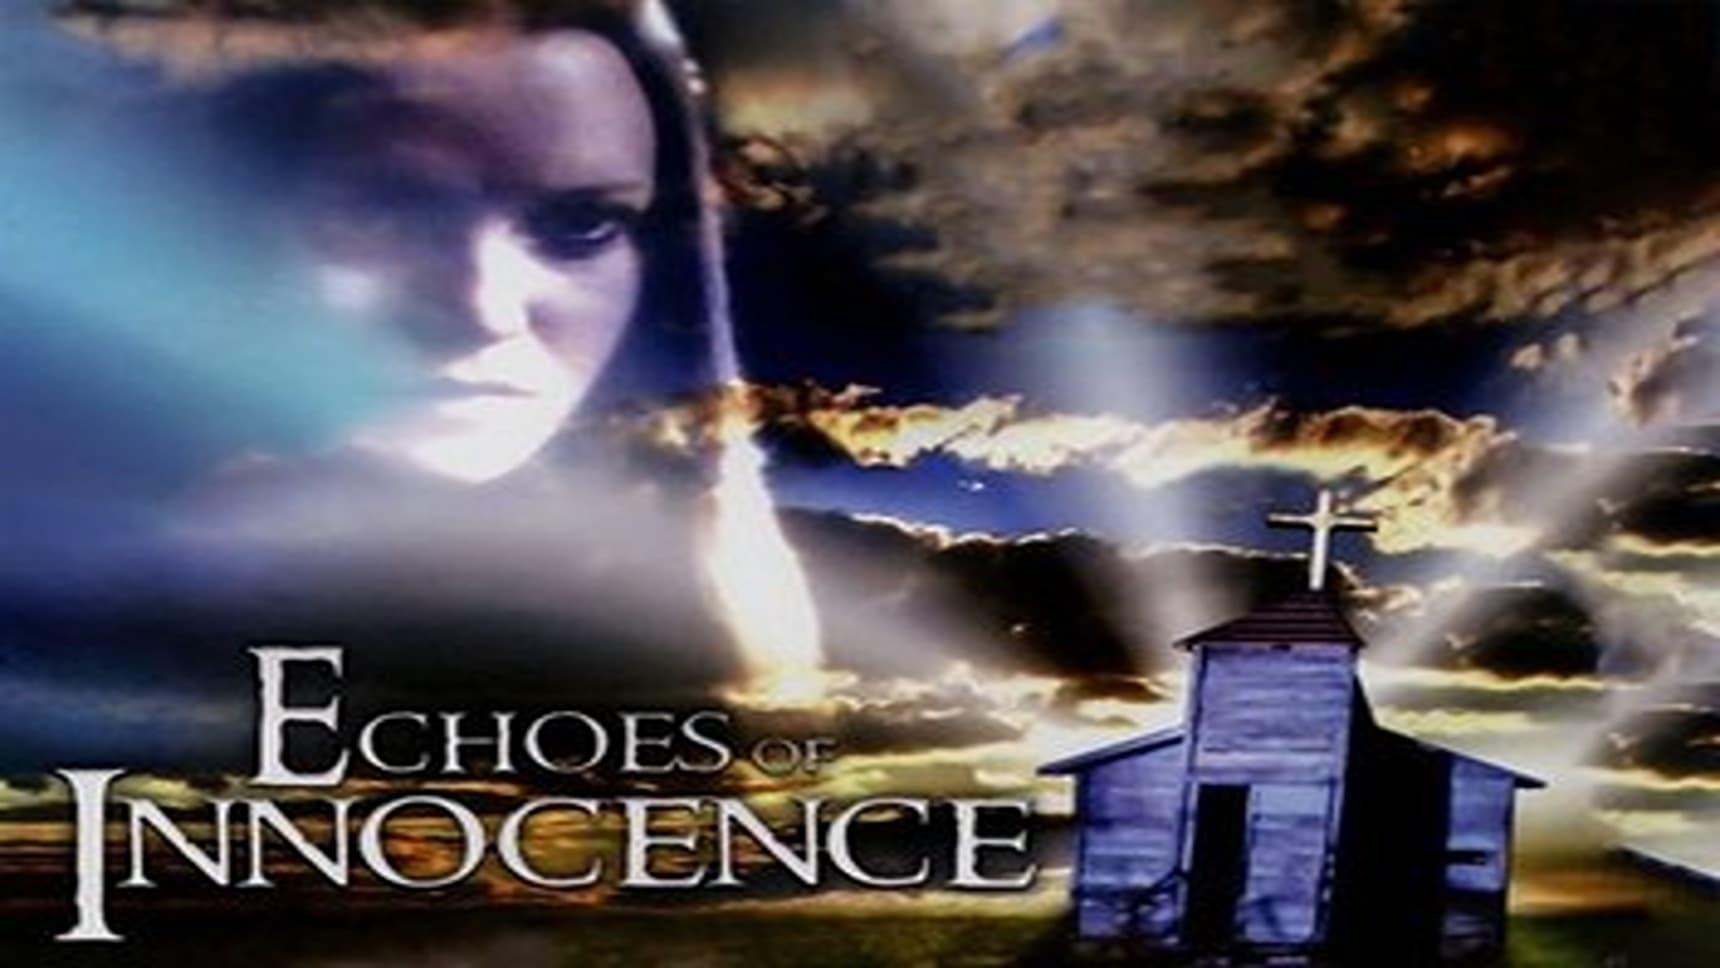 Echoes of Innocence backdrop